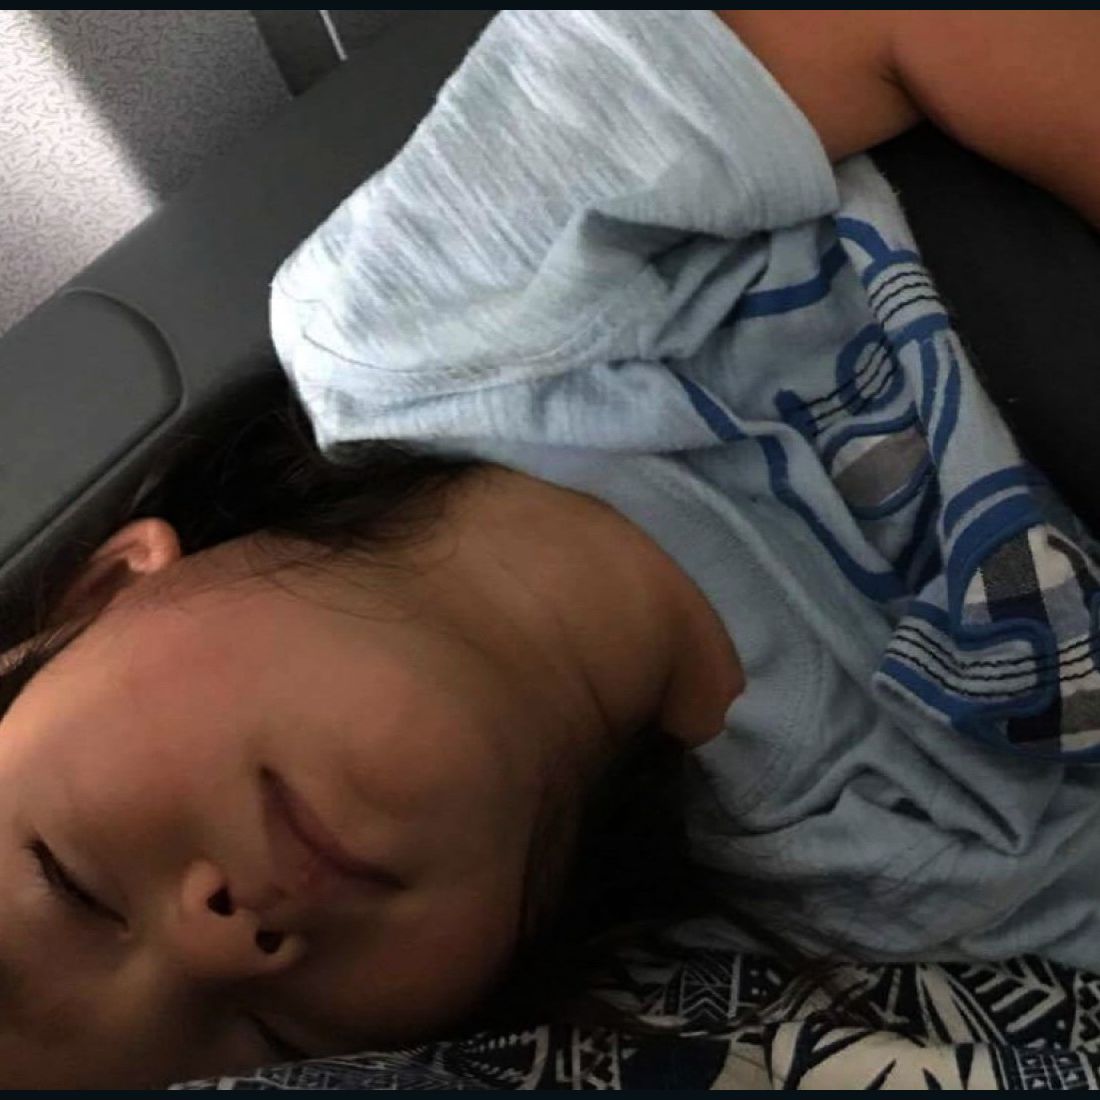 Night Son And Sleeping Mom Fuking - Mom: United forced son to give up seat | CNN Business